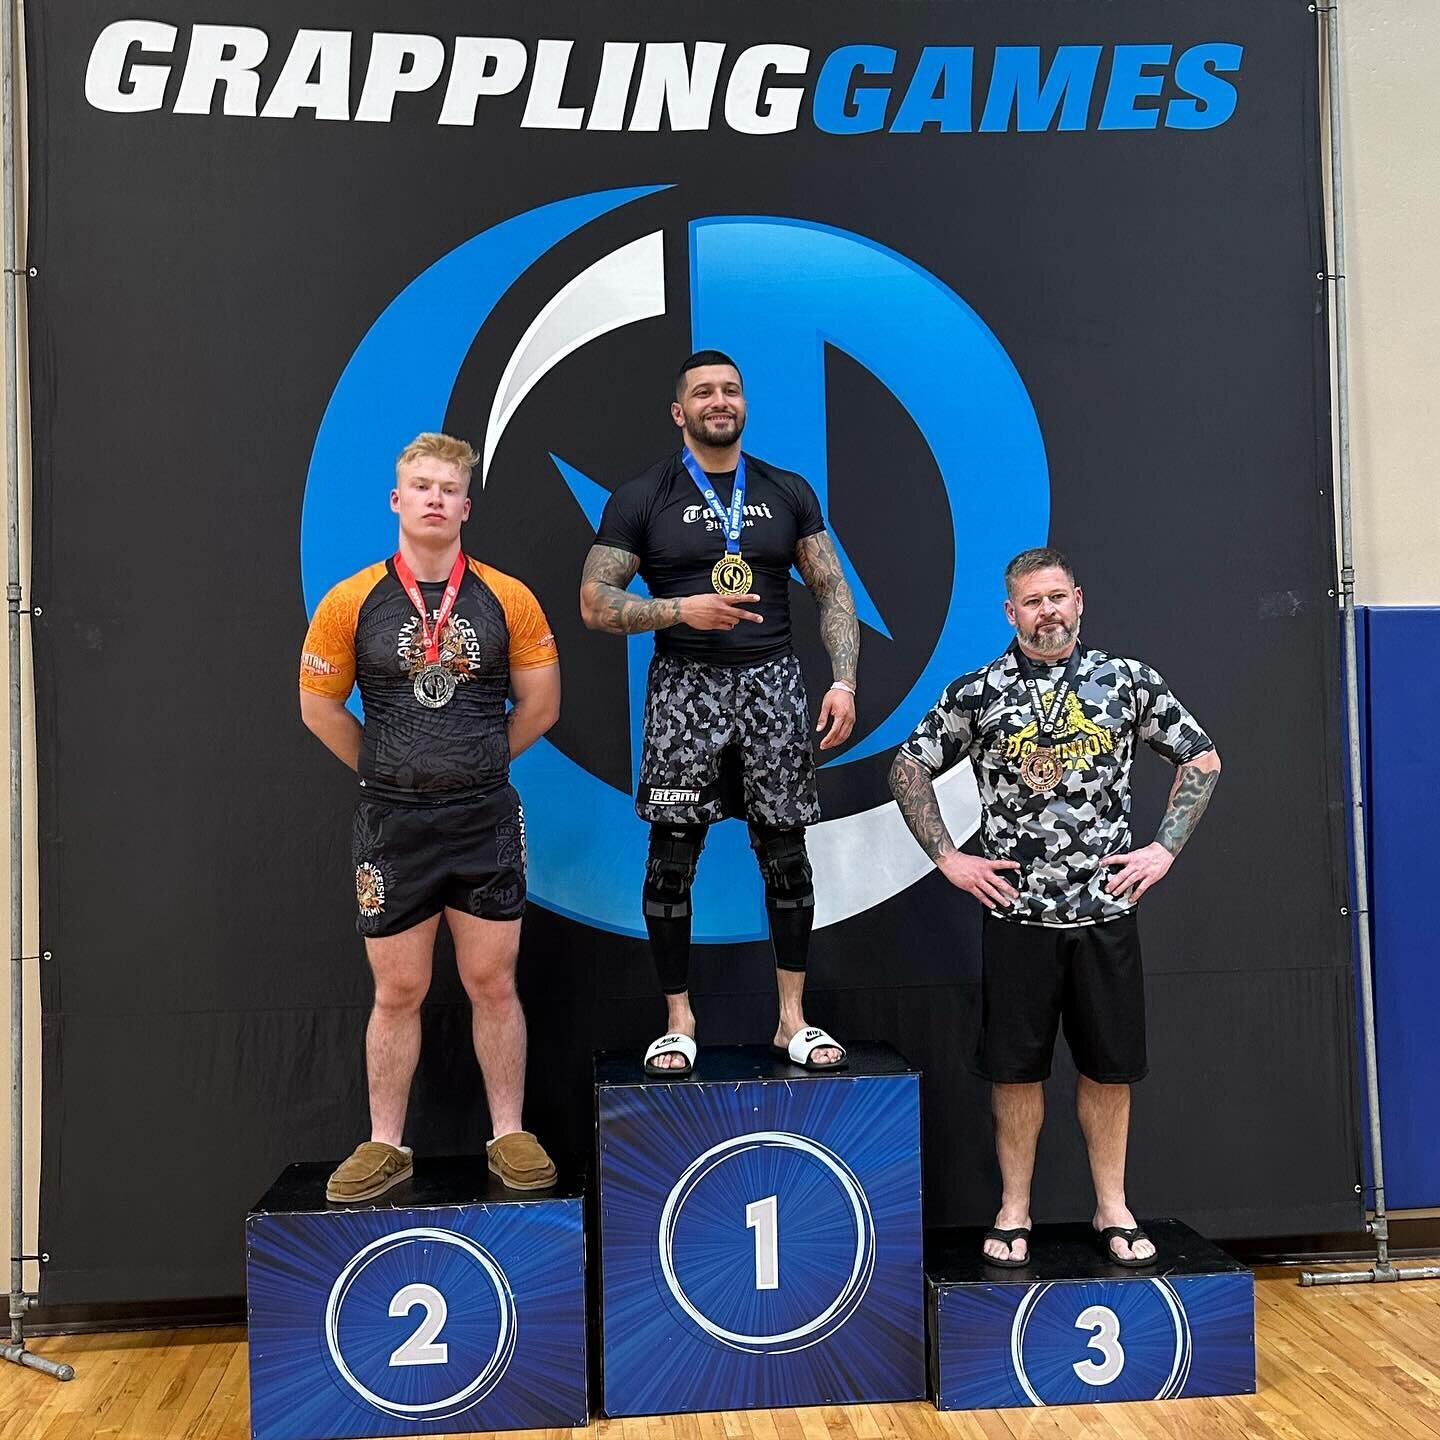 Shout out to Adam who went out and competed yesterday and earned himself a gold medal! Great work Adam! We are beyond proud of your efforts, your training, your determination and motivation! 🤙 OSS! 

#viannabrothers #chicagobjj #dviannabjj #pedrovia